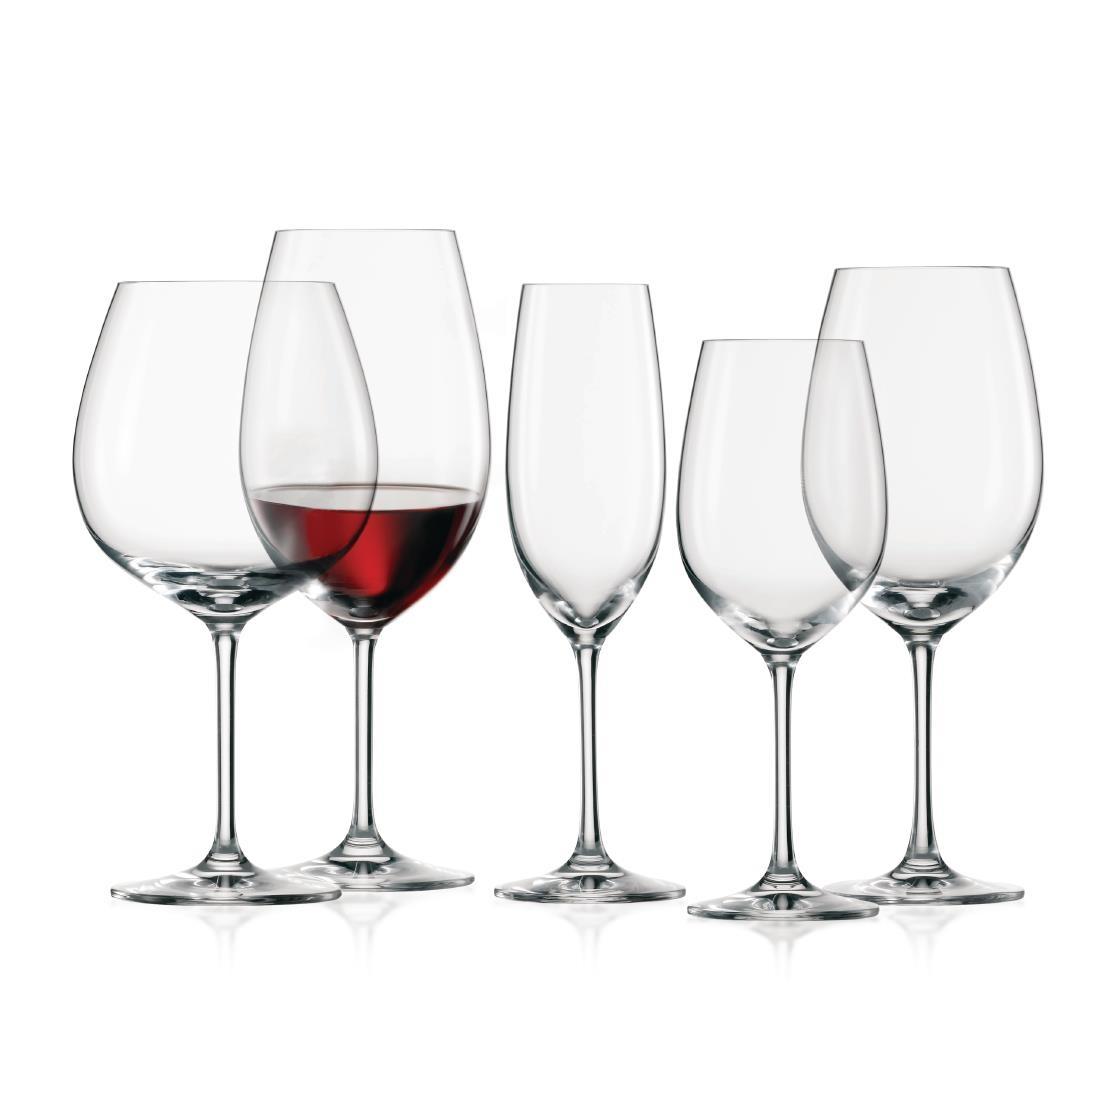 Schott Zwiesel Ivento Large Burgundy Glasses 783ml (Pack of 6) - GL138  - 3